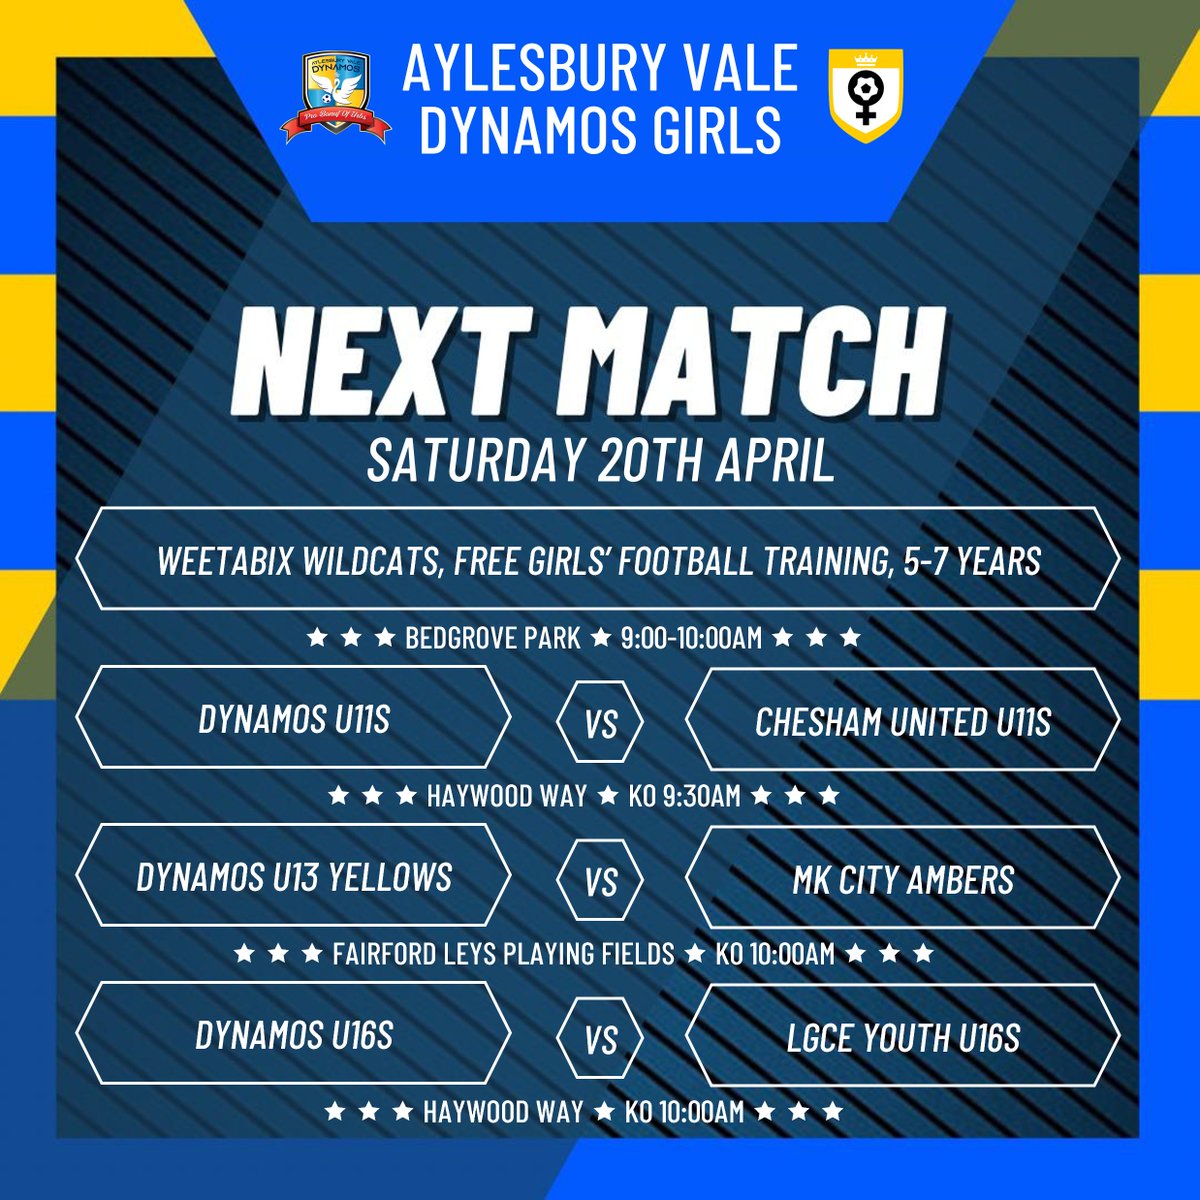 Good luck to all our teams who are in action on Saturday. 💛💙⚽ 

Our U16s will be playing on the main pitch at Haywood Way. Please come down and show your support for the girls.

#LetGirlsPlay #HerGameToo #GrassrootsFootball #WeAreTheDynamos @AylesNews